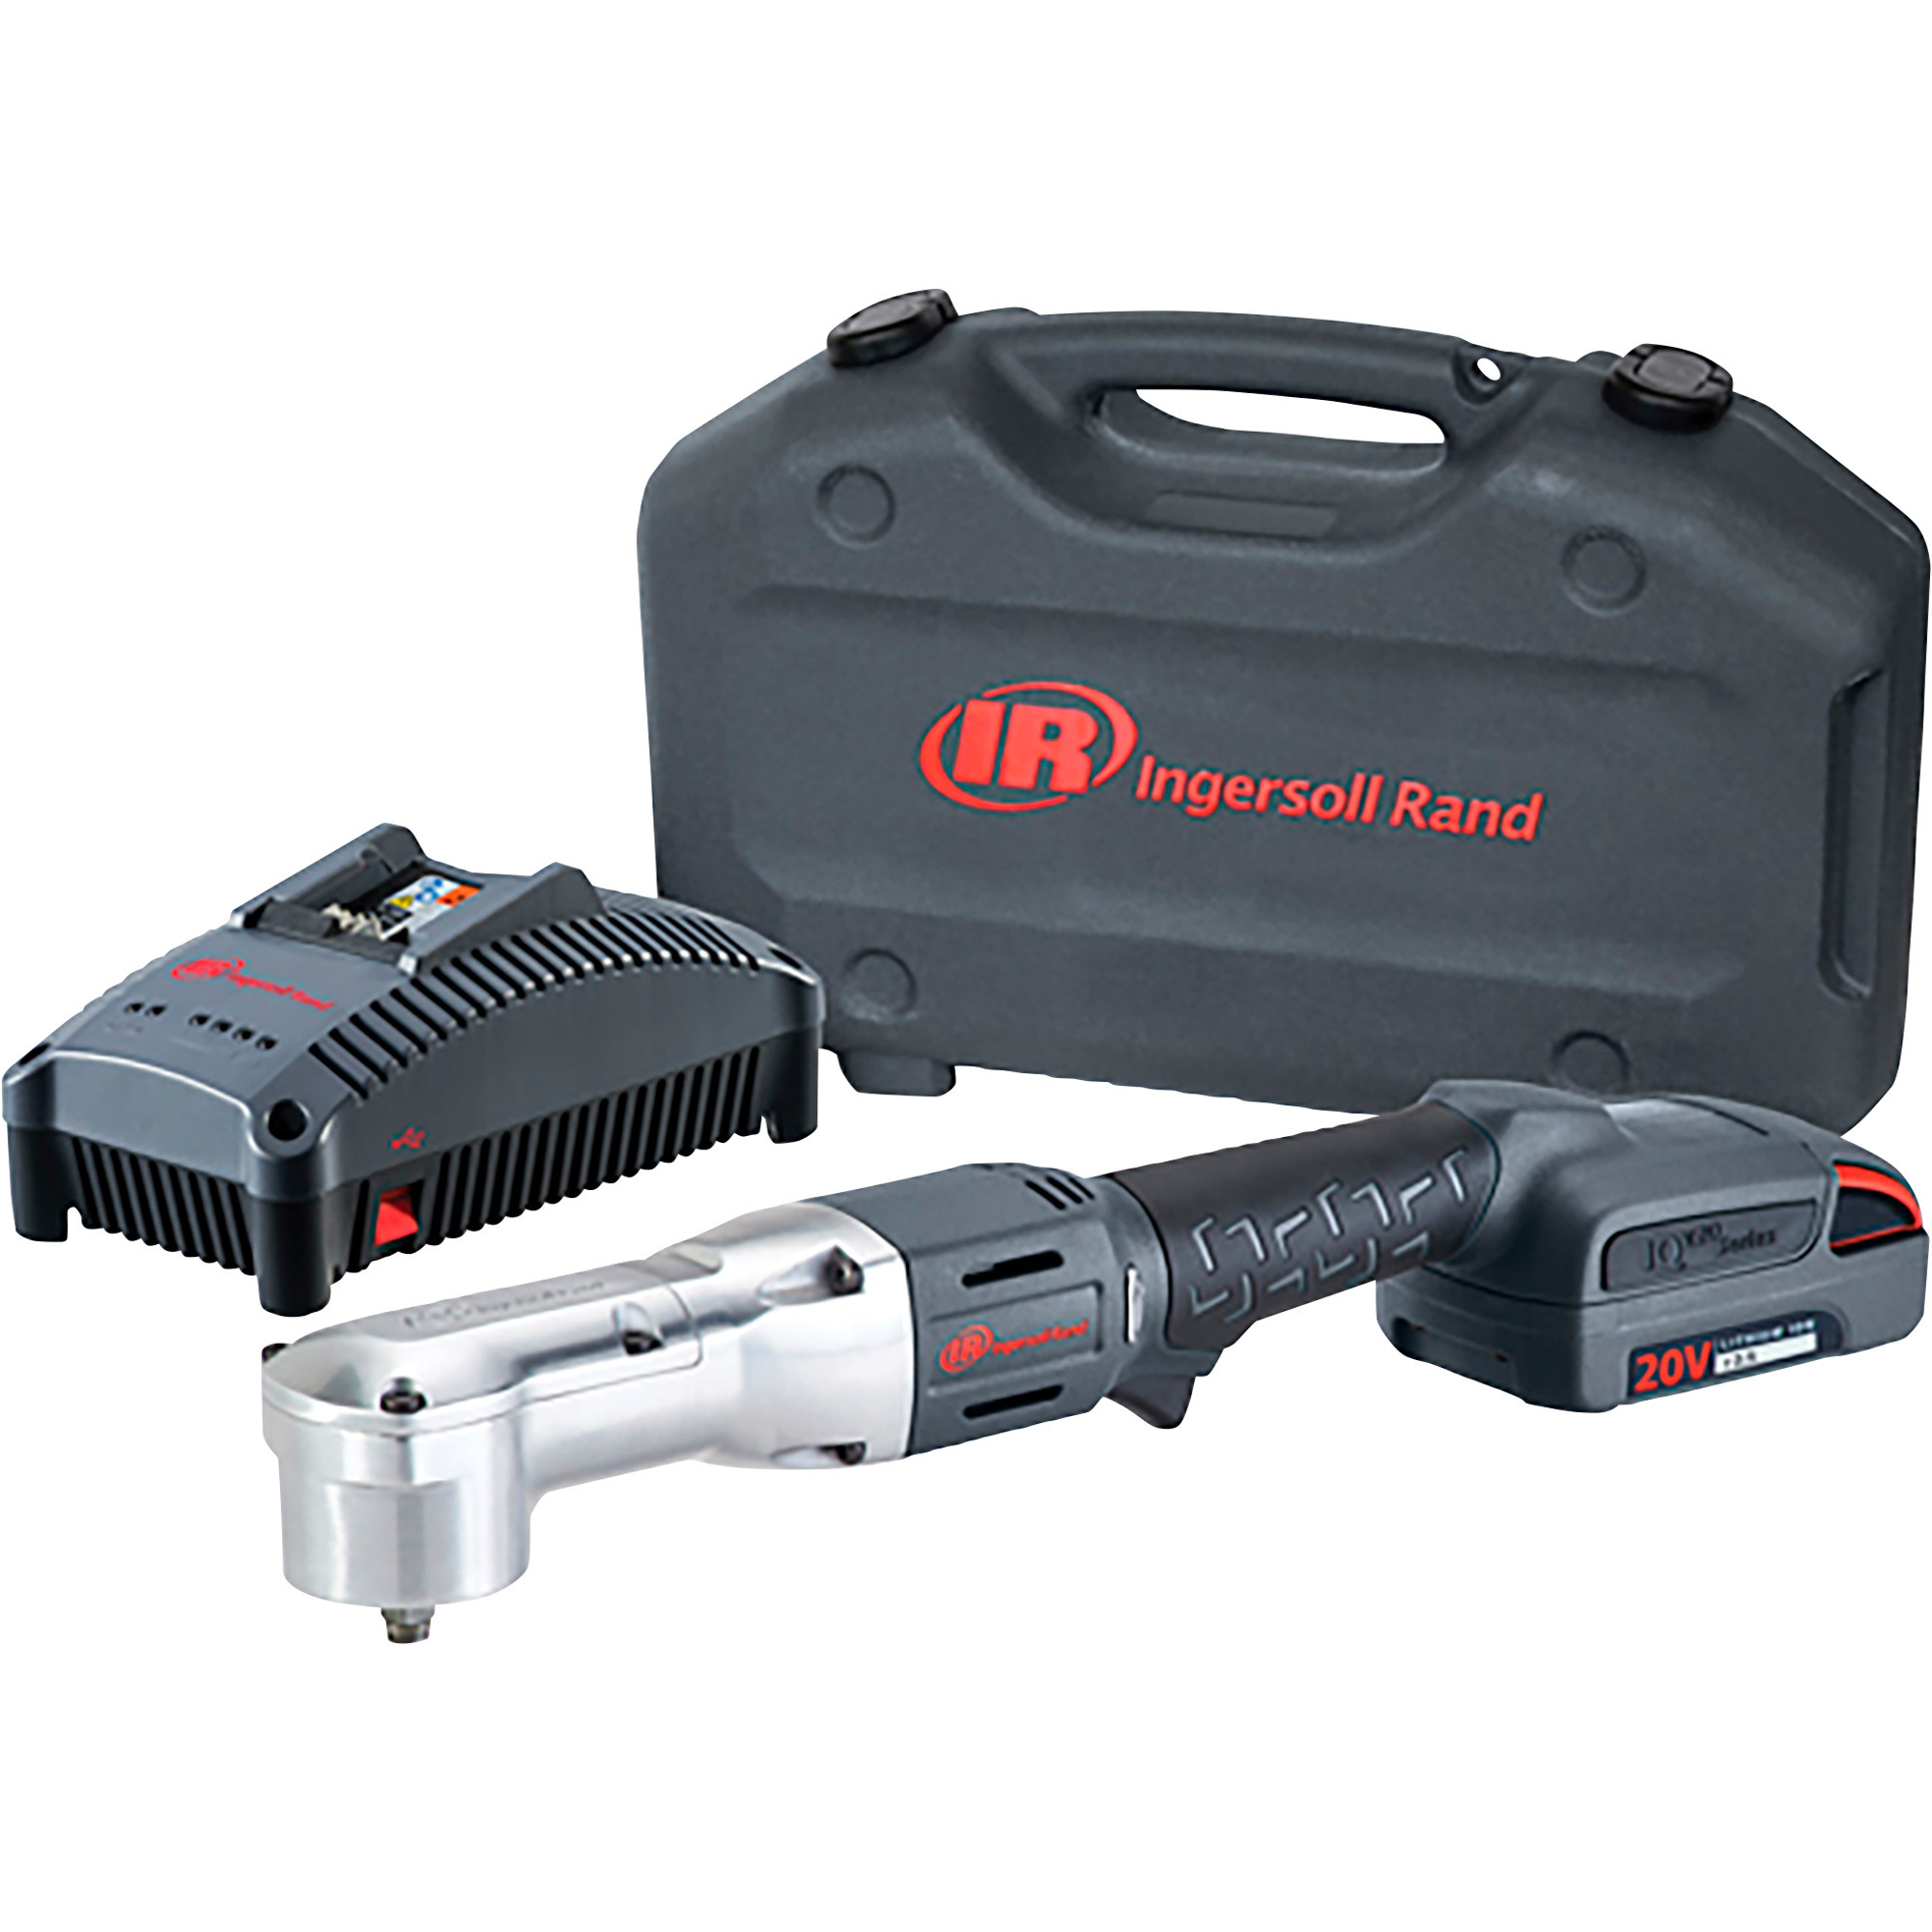 Ingersoll Rand 20V Cordless Right Angle Impact Wrench Kit, 3/8Inch Drive, 180 Ft./Lb. Torque, Battery, Model W5330-K12